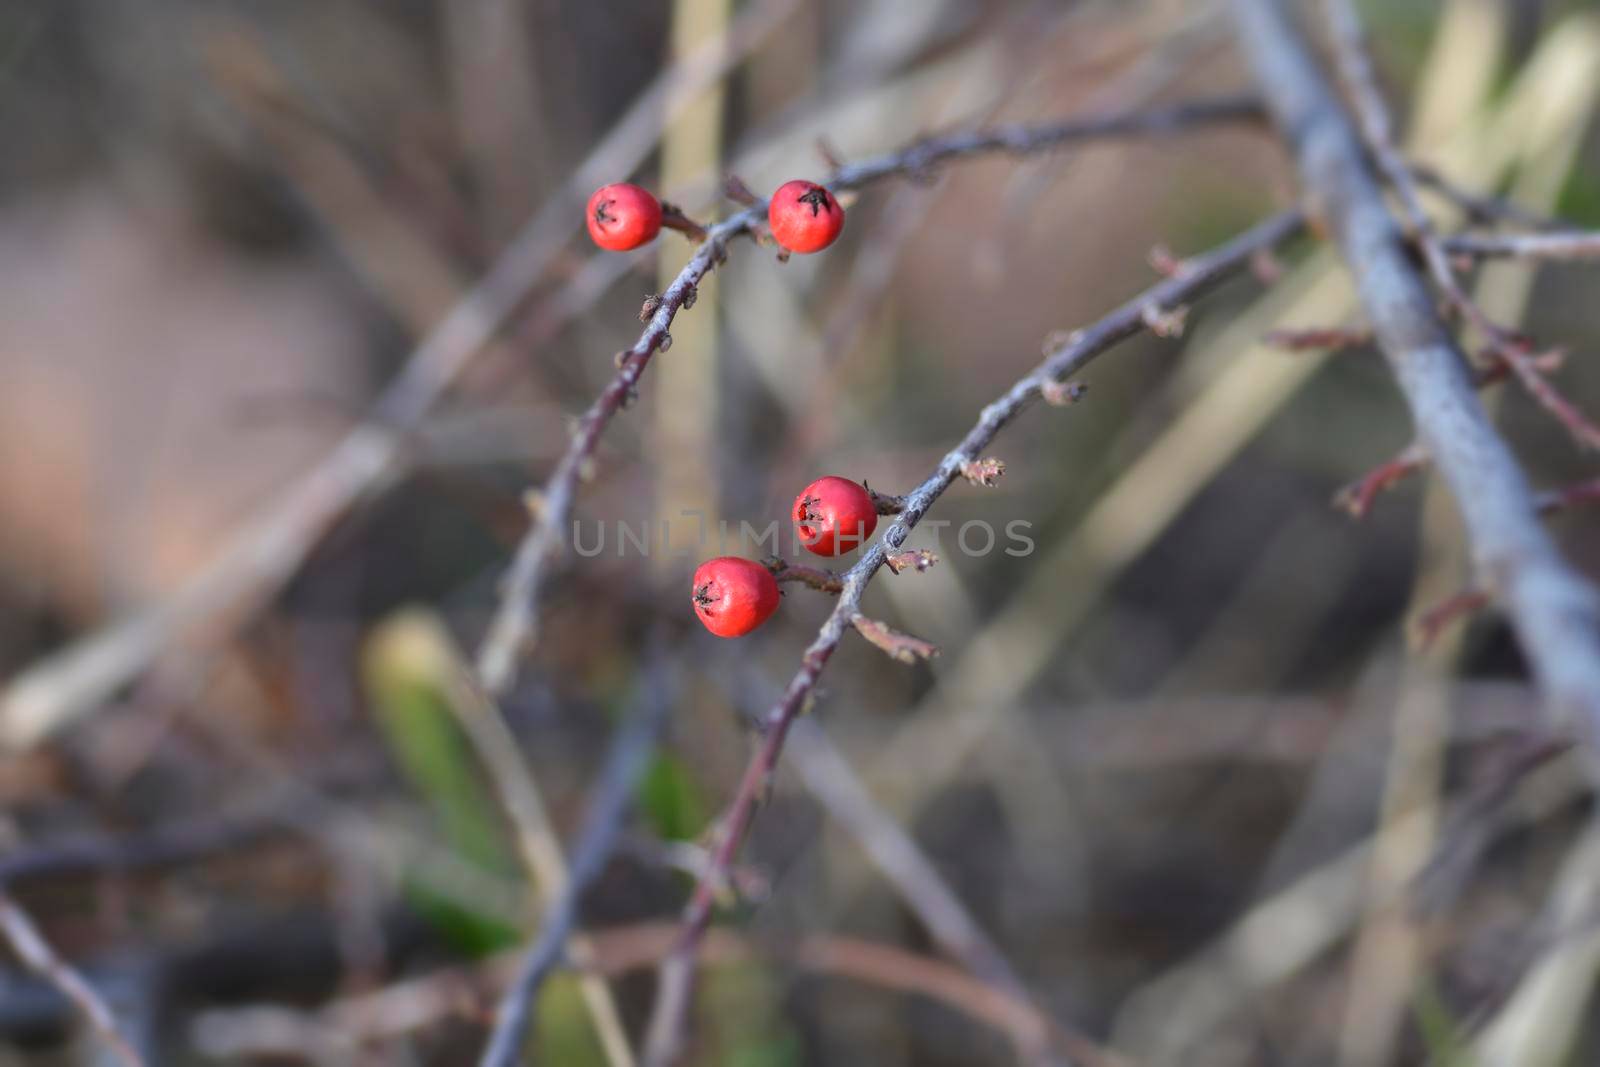 Rock cotoneaster by nahhan